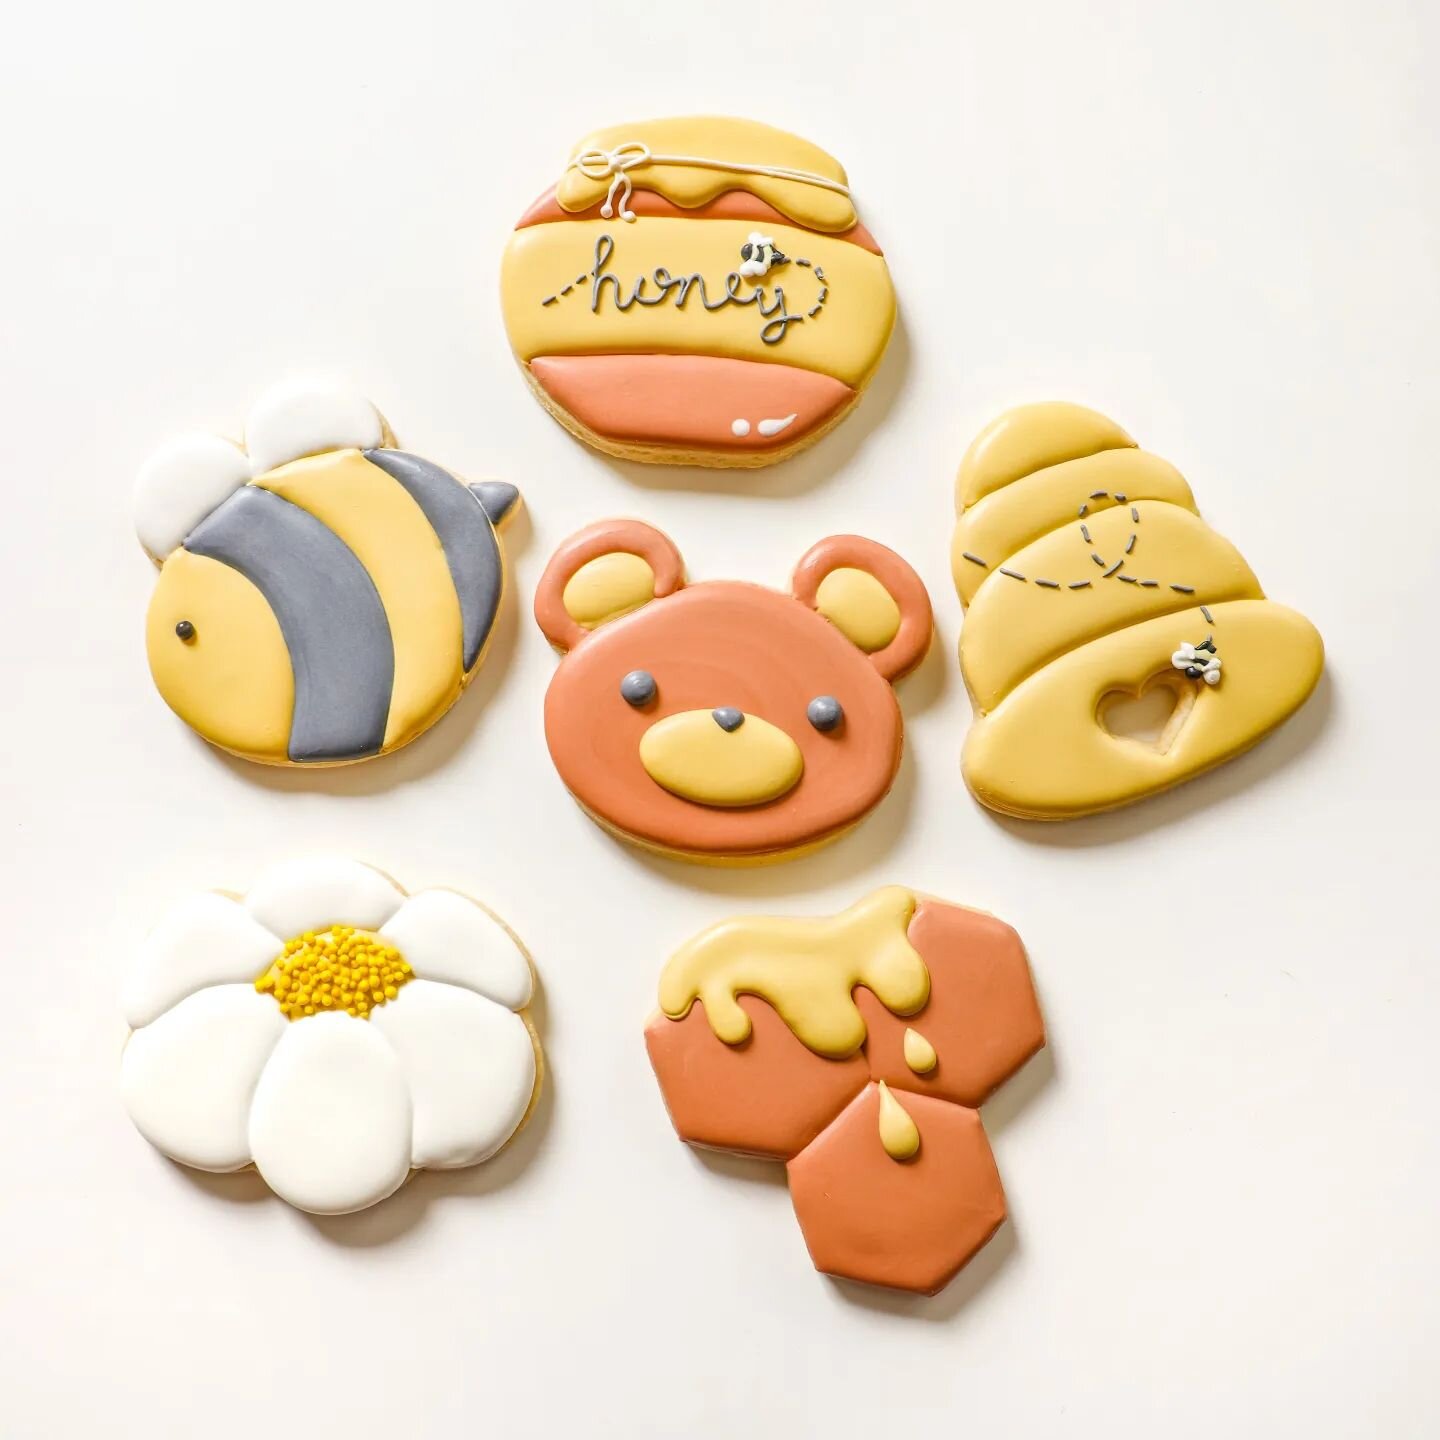 ✨G I V E A W A Y✨
.
Win a ticket to our Oh, Honey! Cookie Decorating Class at @billysbakerynyc upper west side location on May 7th from 2pm-4pm!
Head to the link in bio to learn more about the class, pick up a ticket, or order a cookie decorating kit